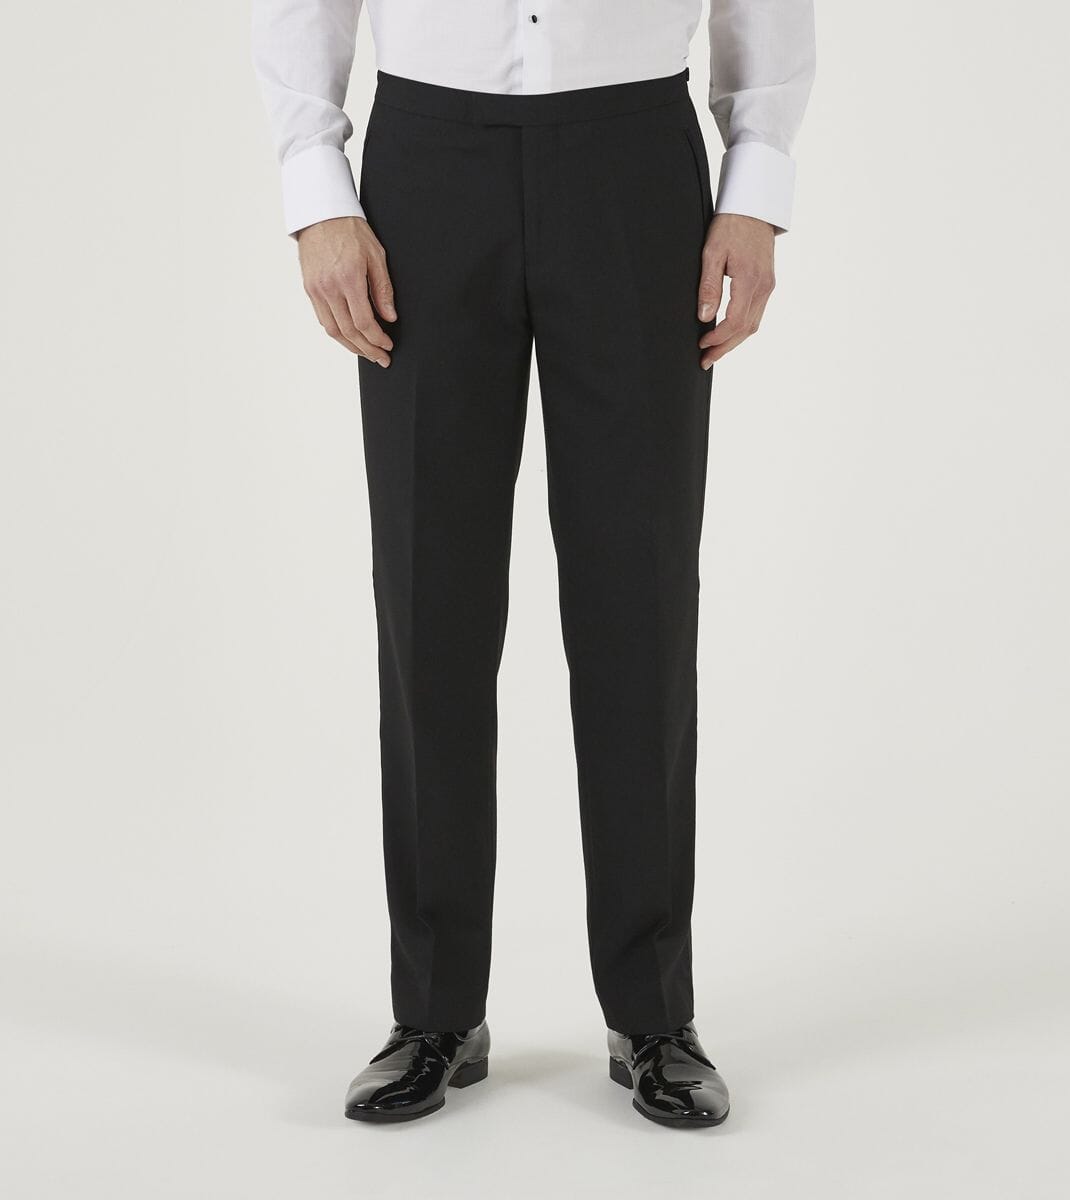 Cavendish Black Dinner Suit Trousers - Trousers - 30R - THREADPEPPER